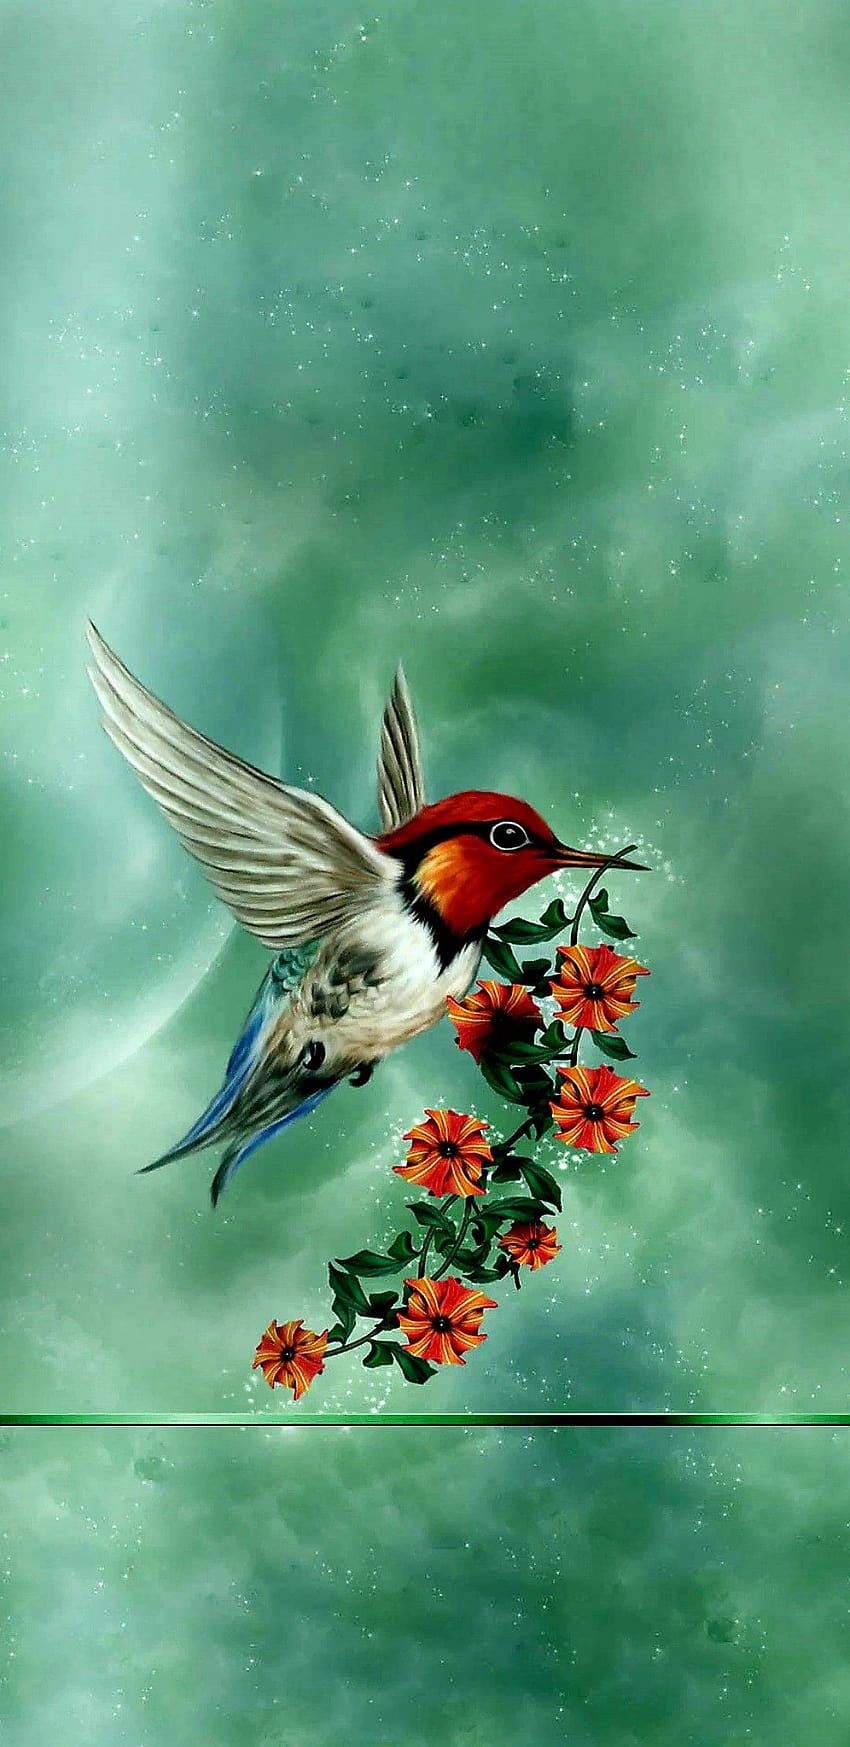 A bird flying over some flowers in the air - 